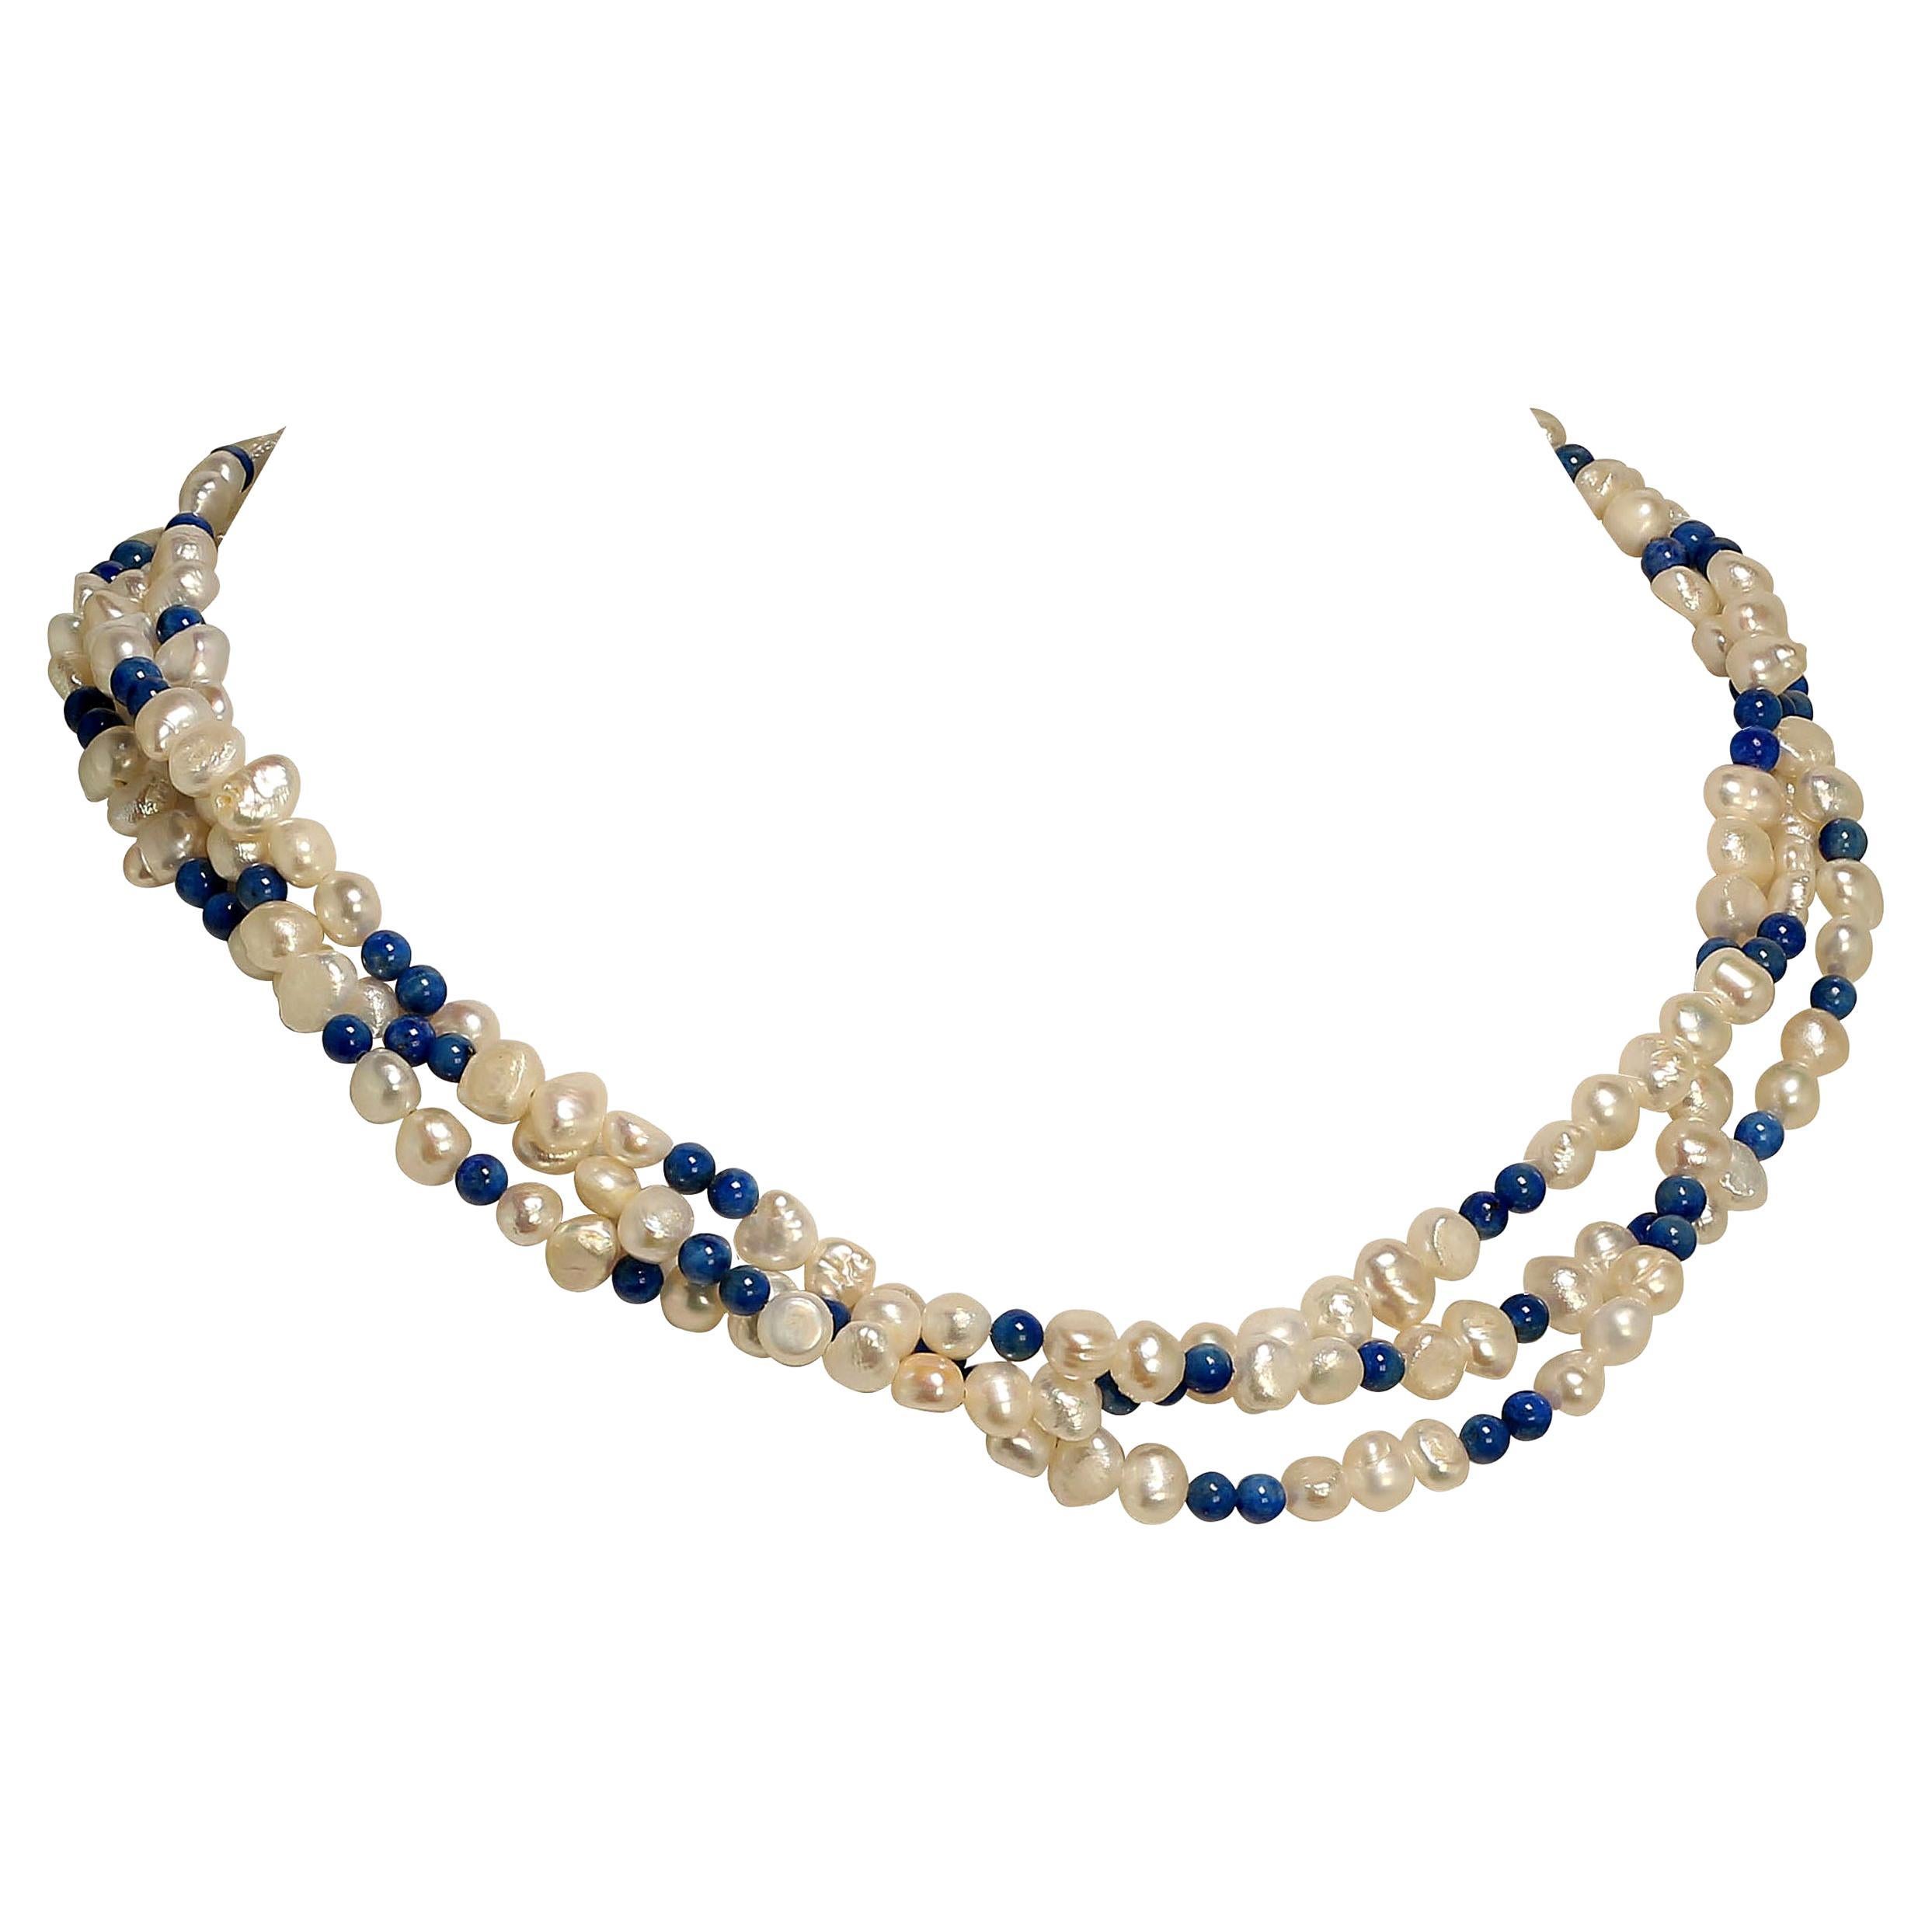 AJD Three-Strand 17 Inch  Necklace  White Pearls and Lapis Lazuli 